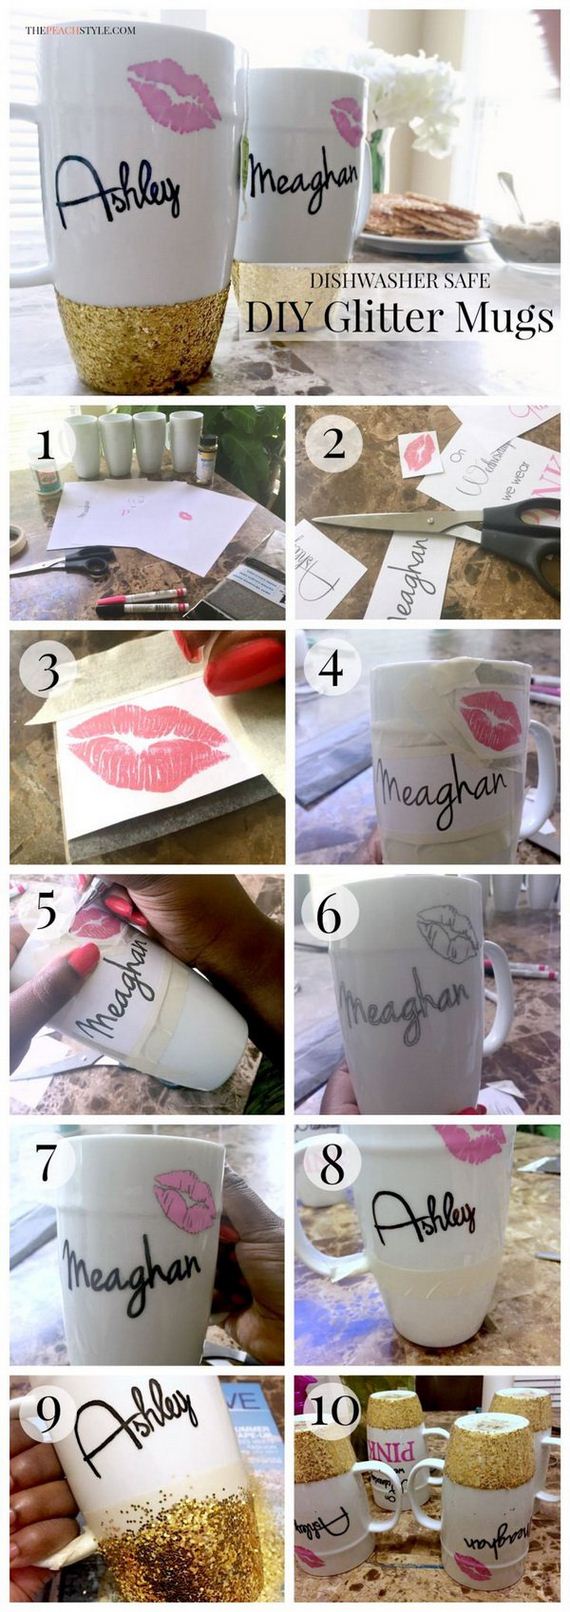 19-diy-personalized-gift-ideas